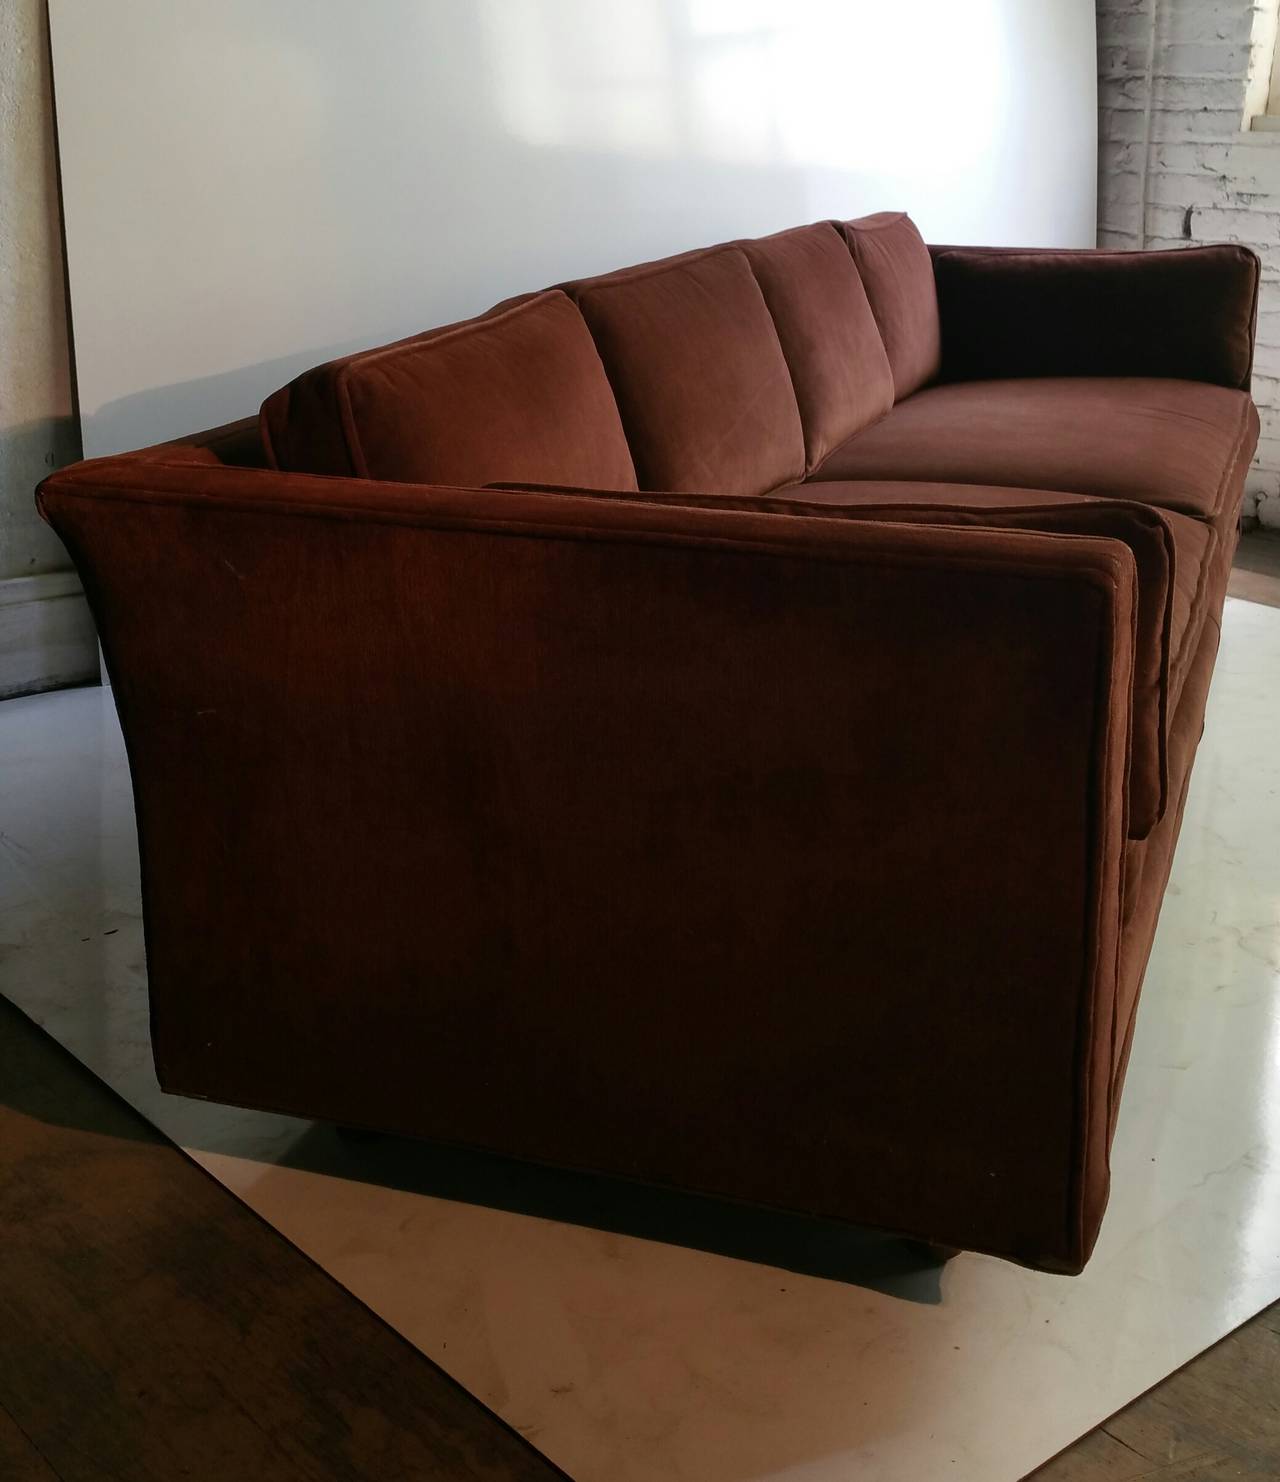 four seat couch